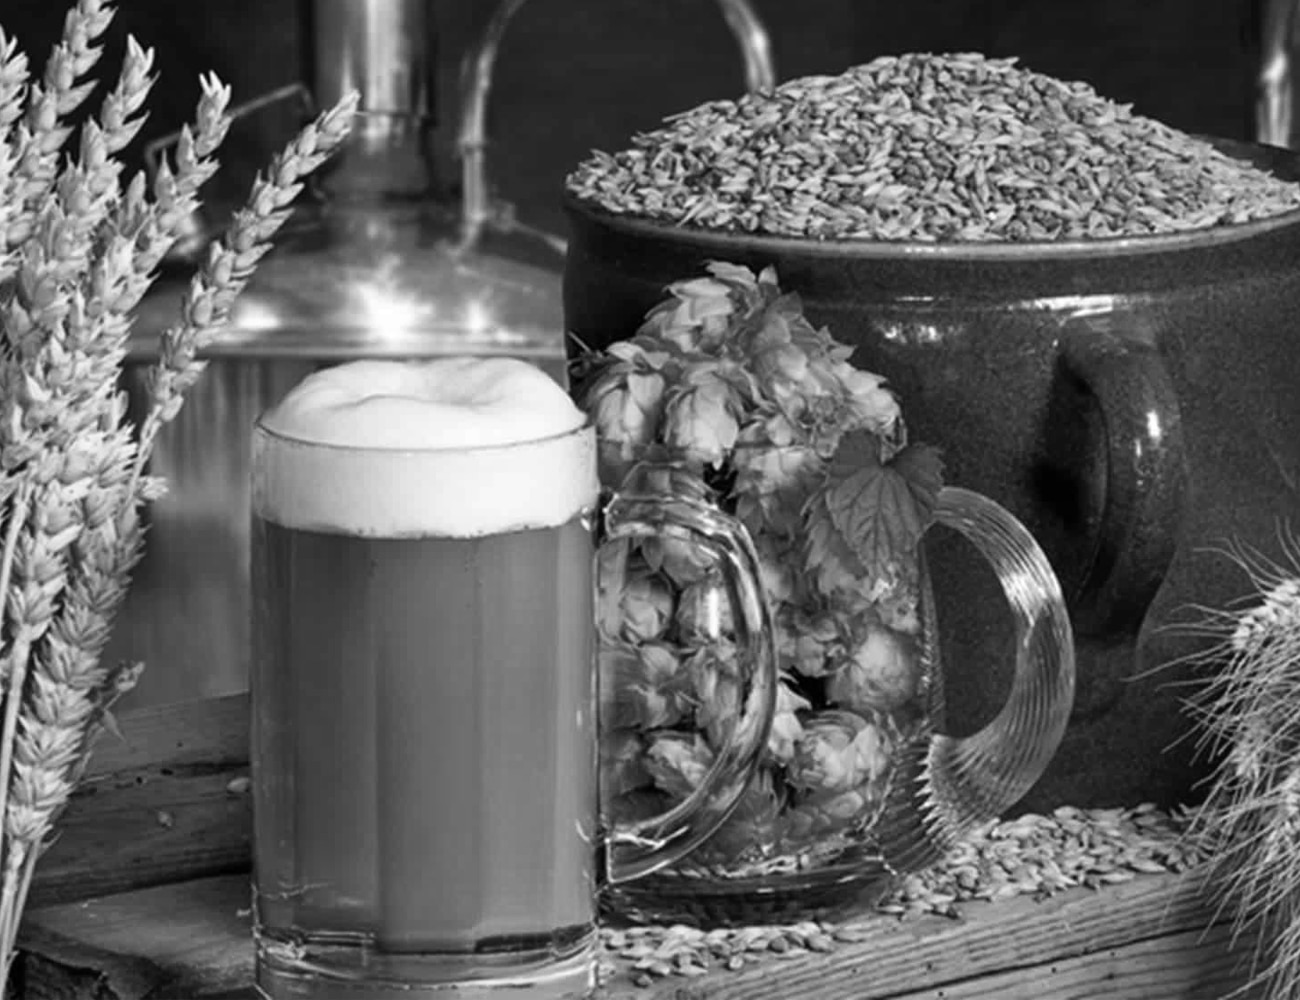 A Cup of Beer, Barley and Malt